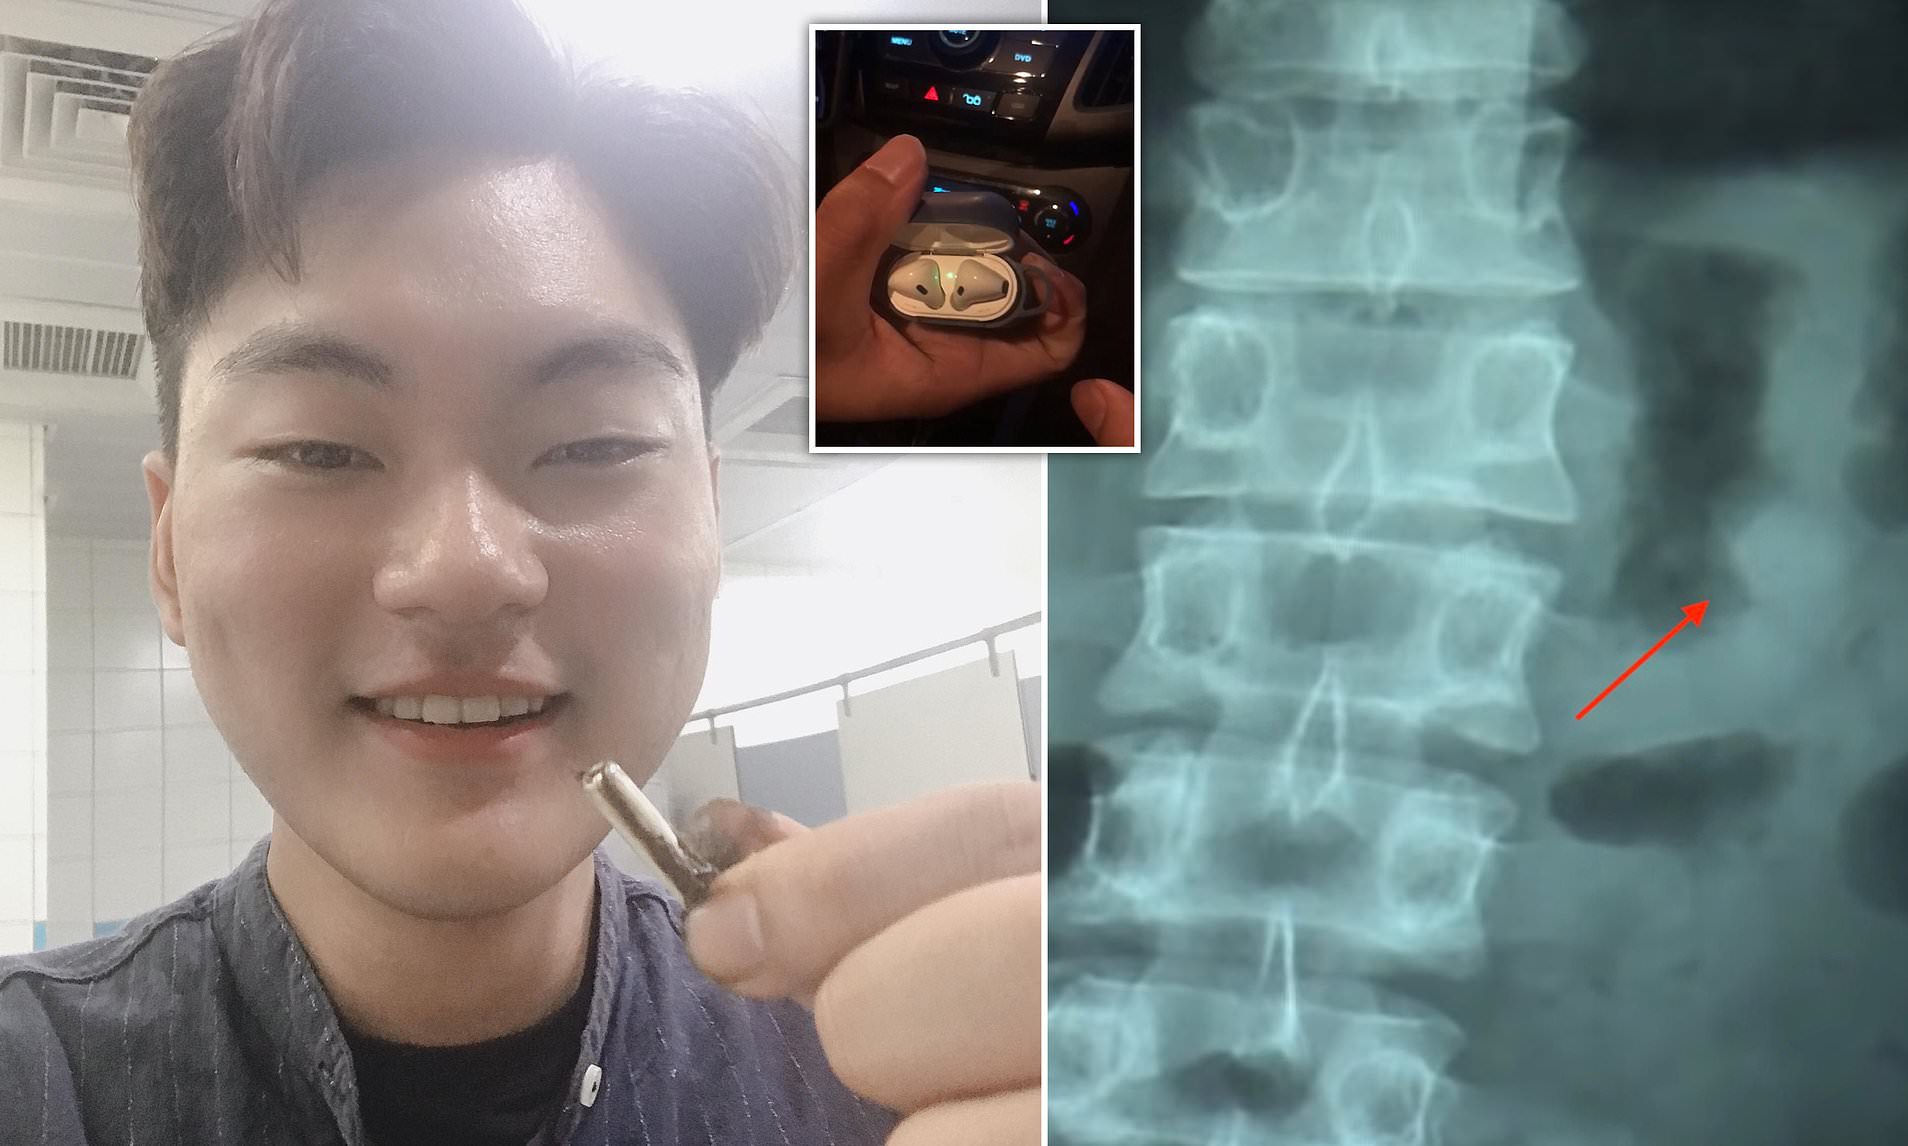 Man Accidentally Swallows AirPod, Finds It Still Works After Passing It